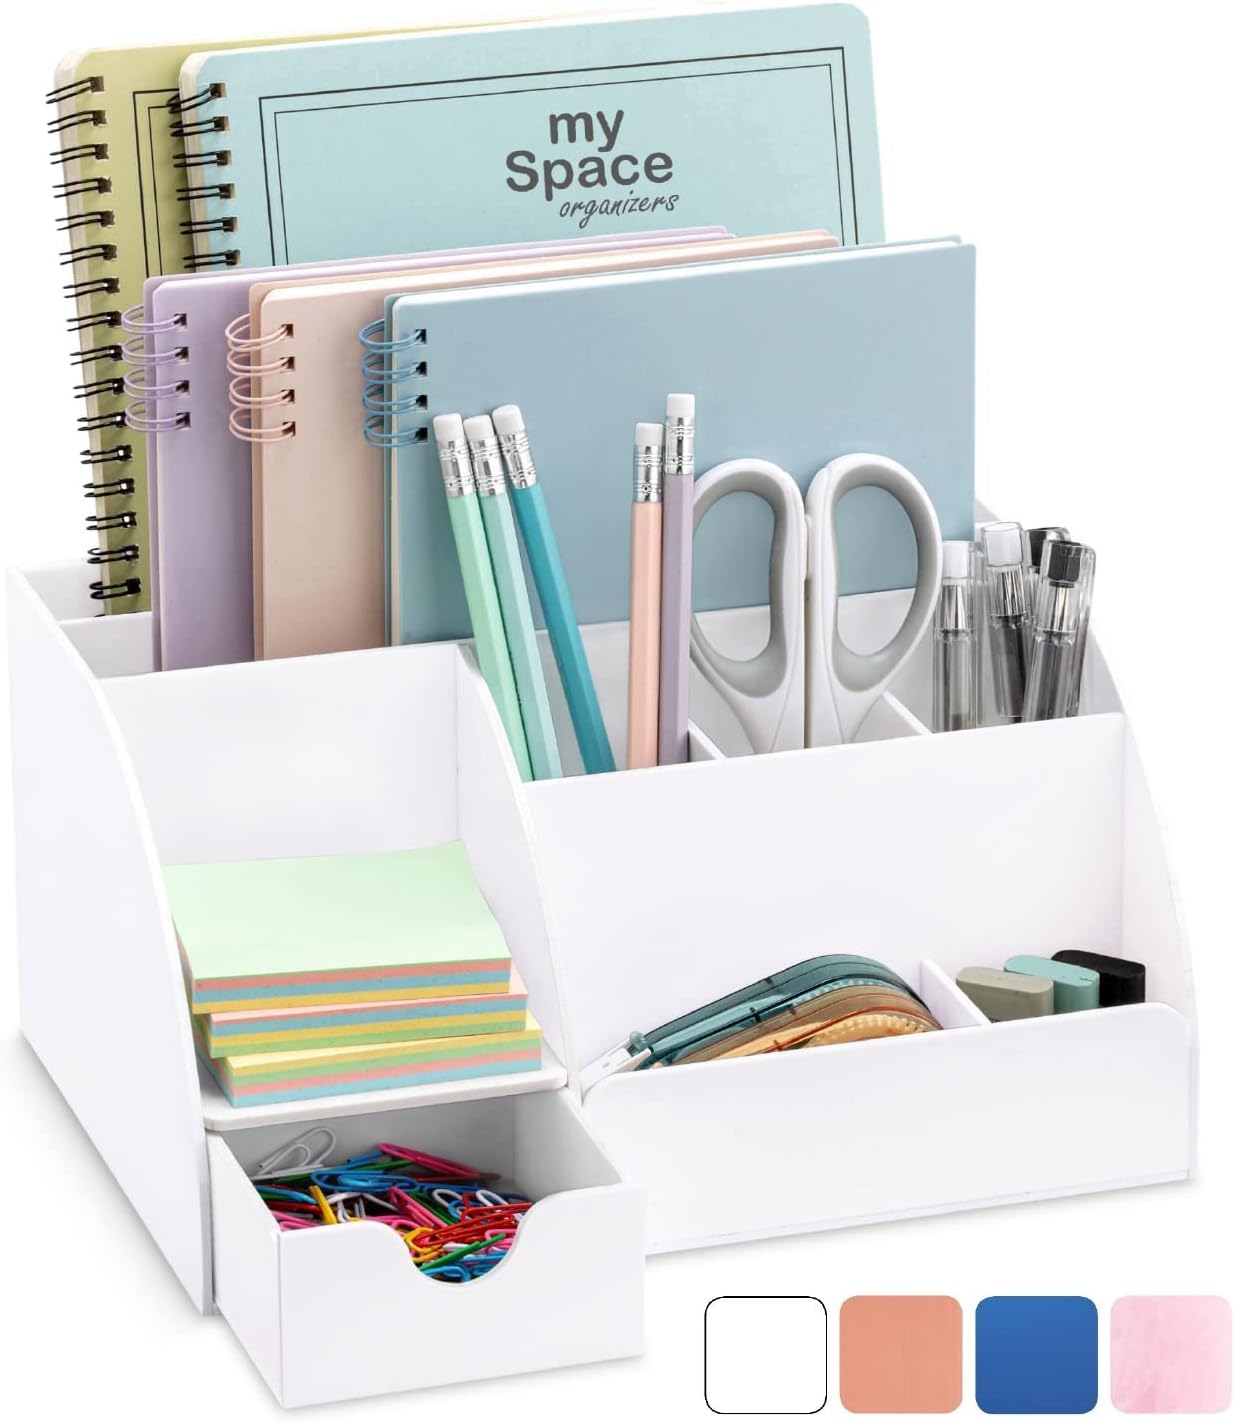 An image of a white teacher's desk organizer tohold all the things.